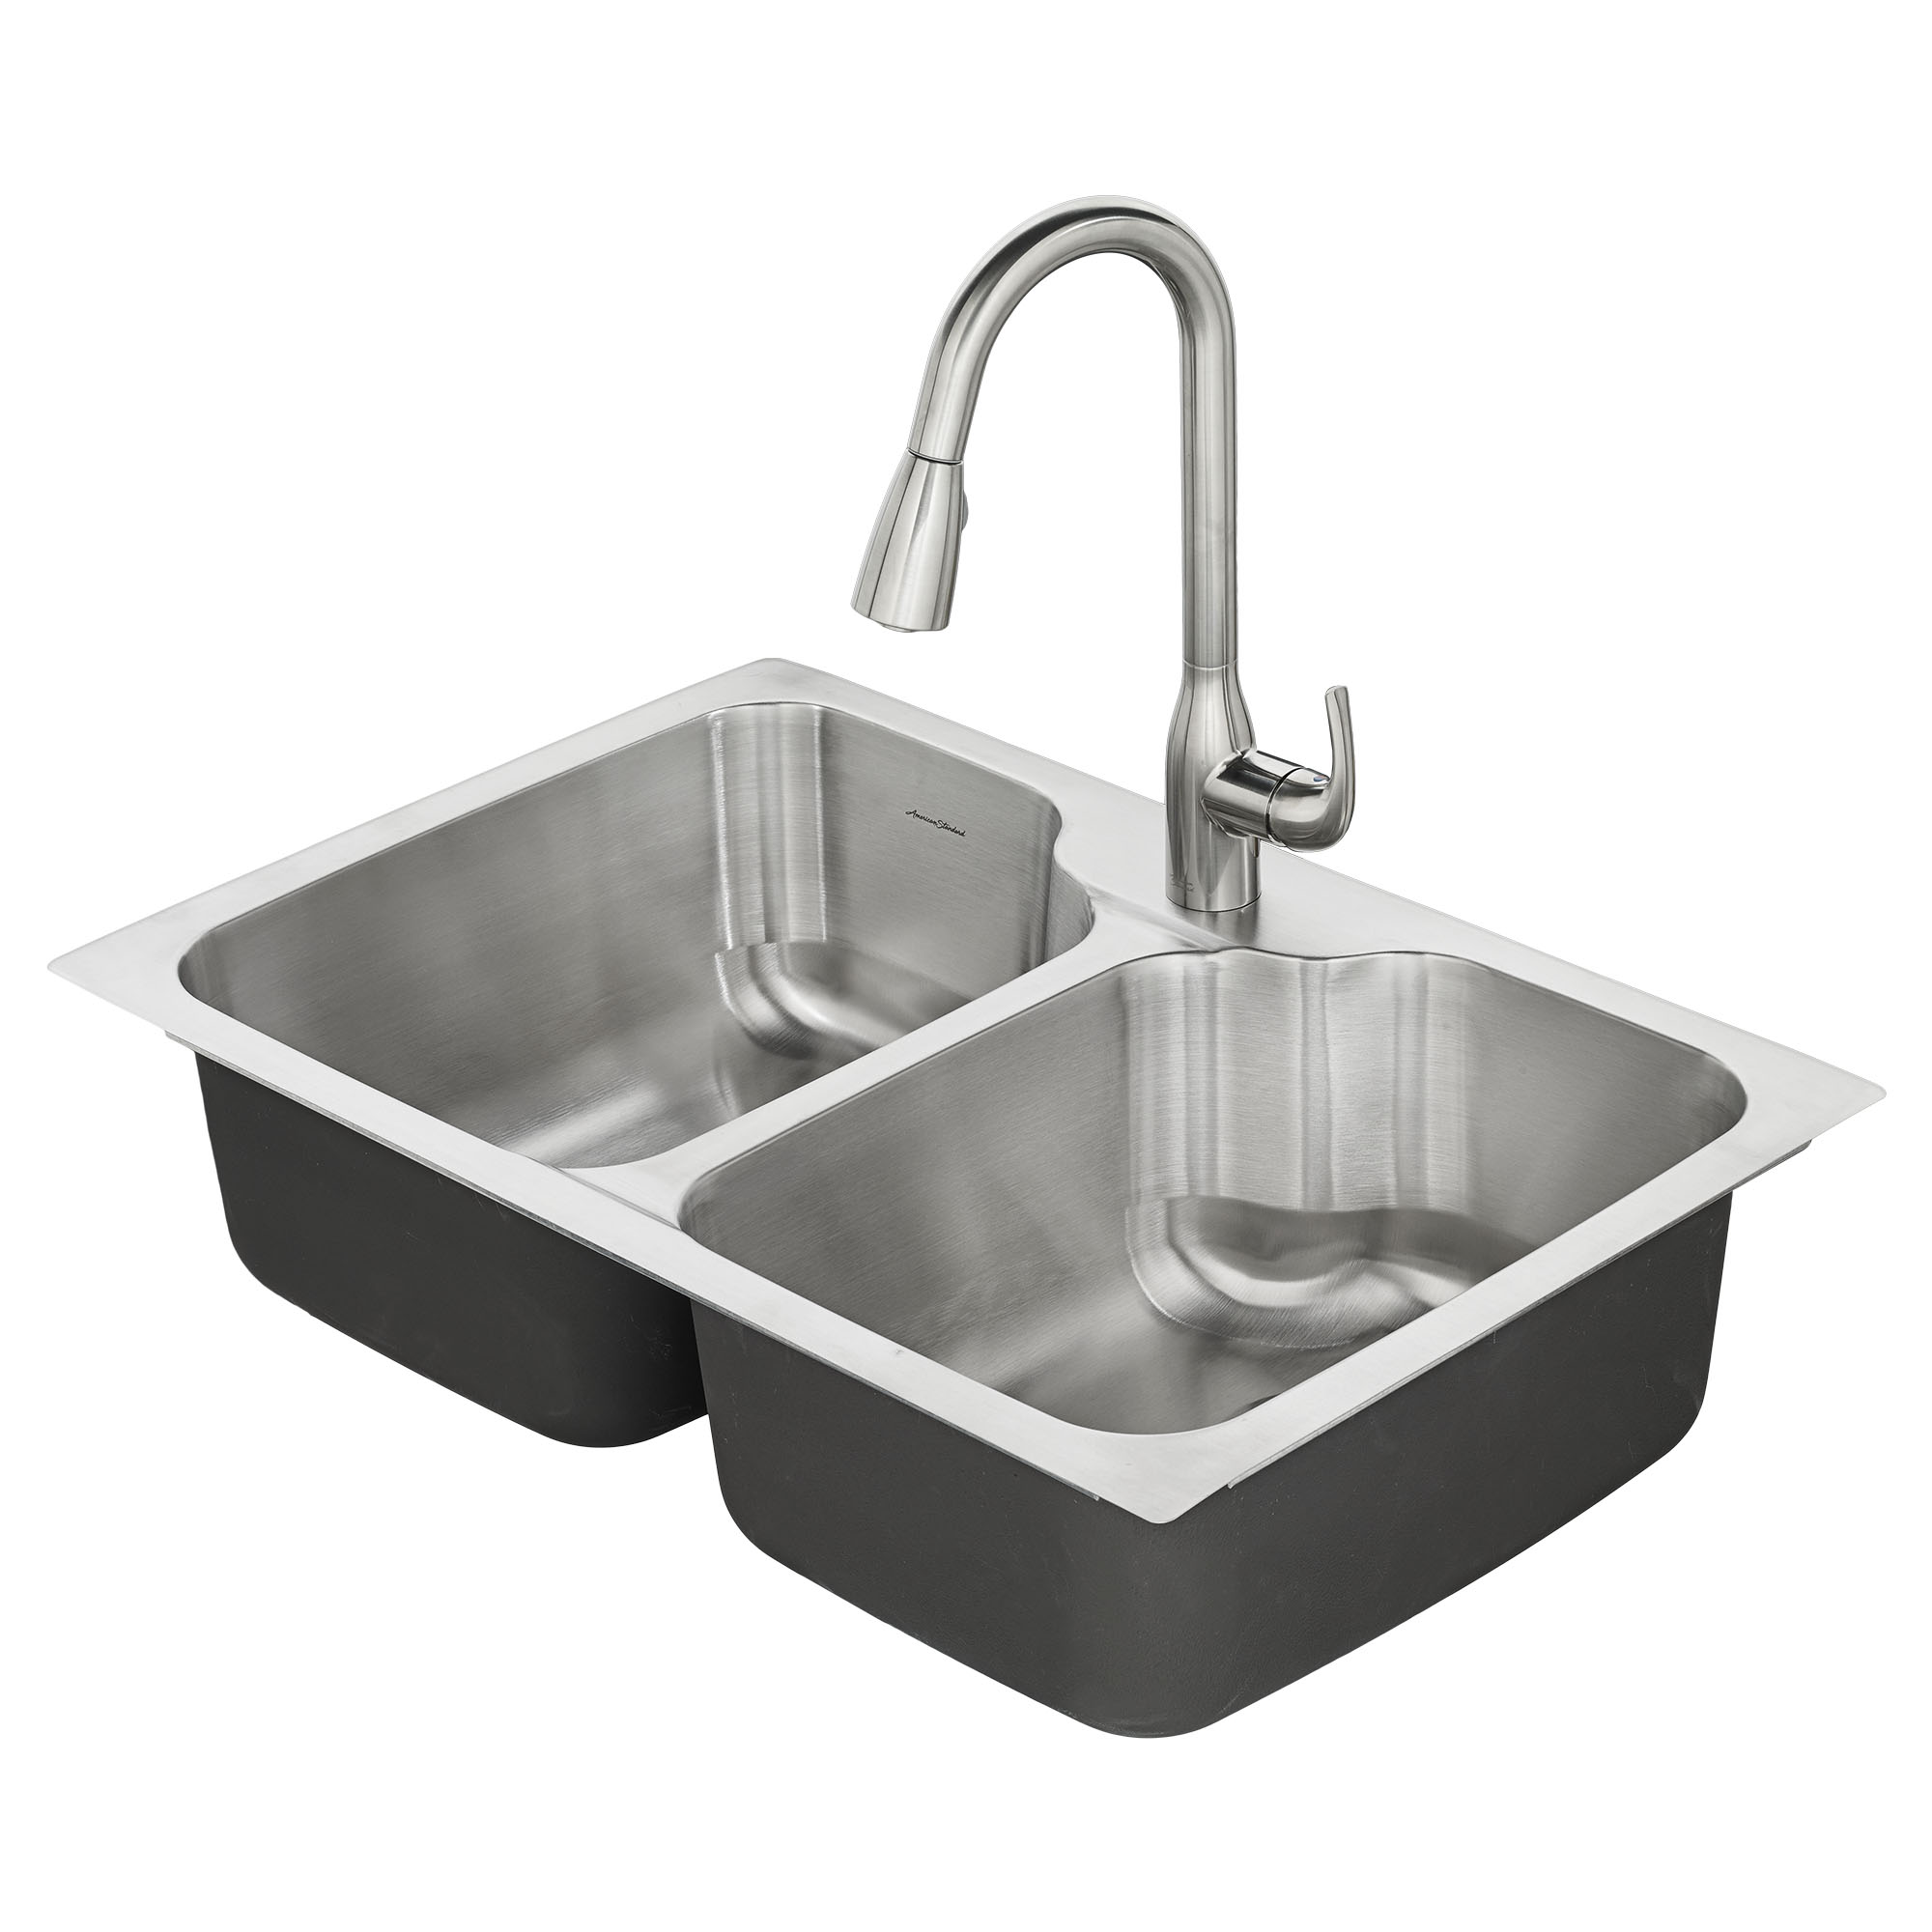 How to Unclog a Double Kitchen Sink with Standing Water?